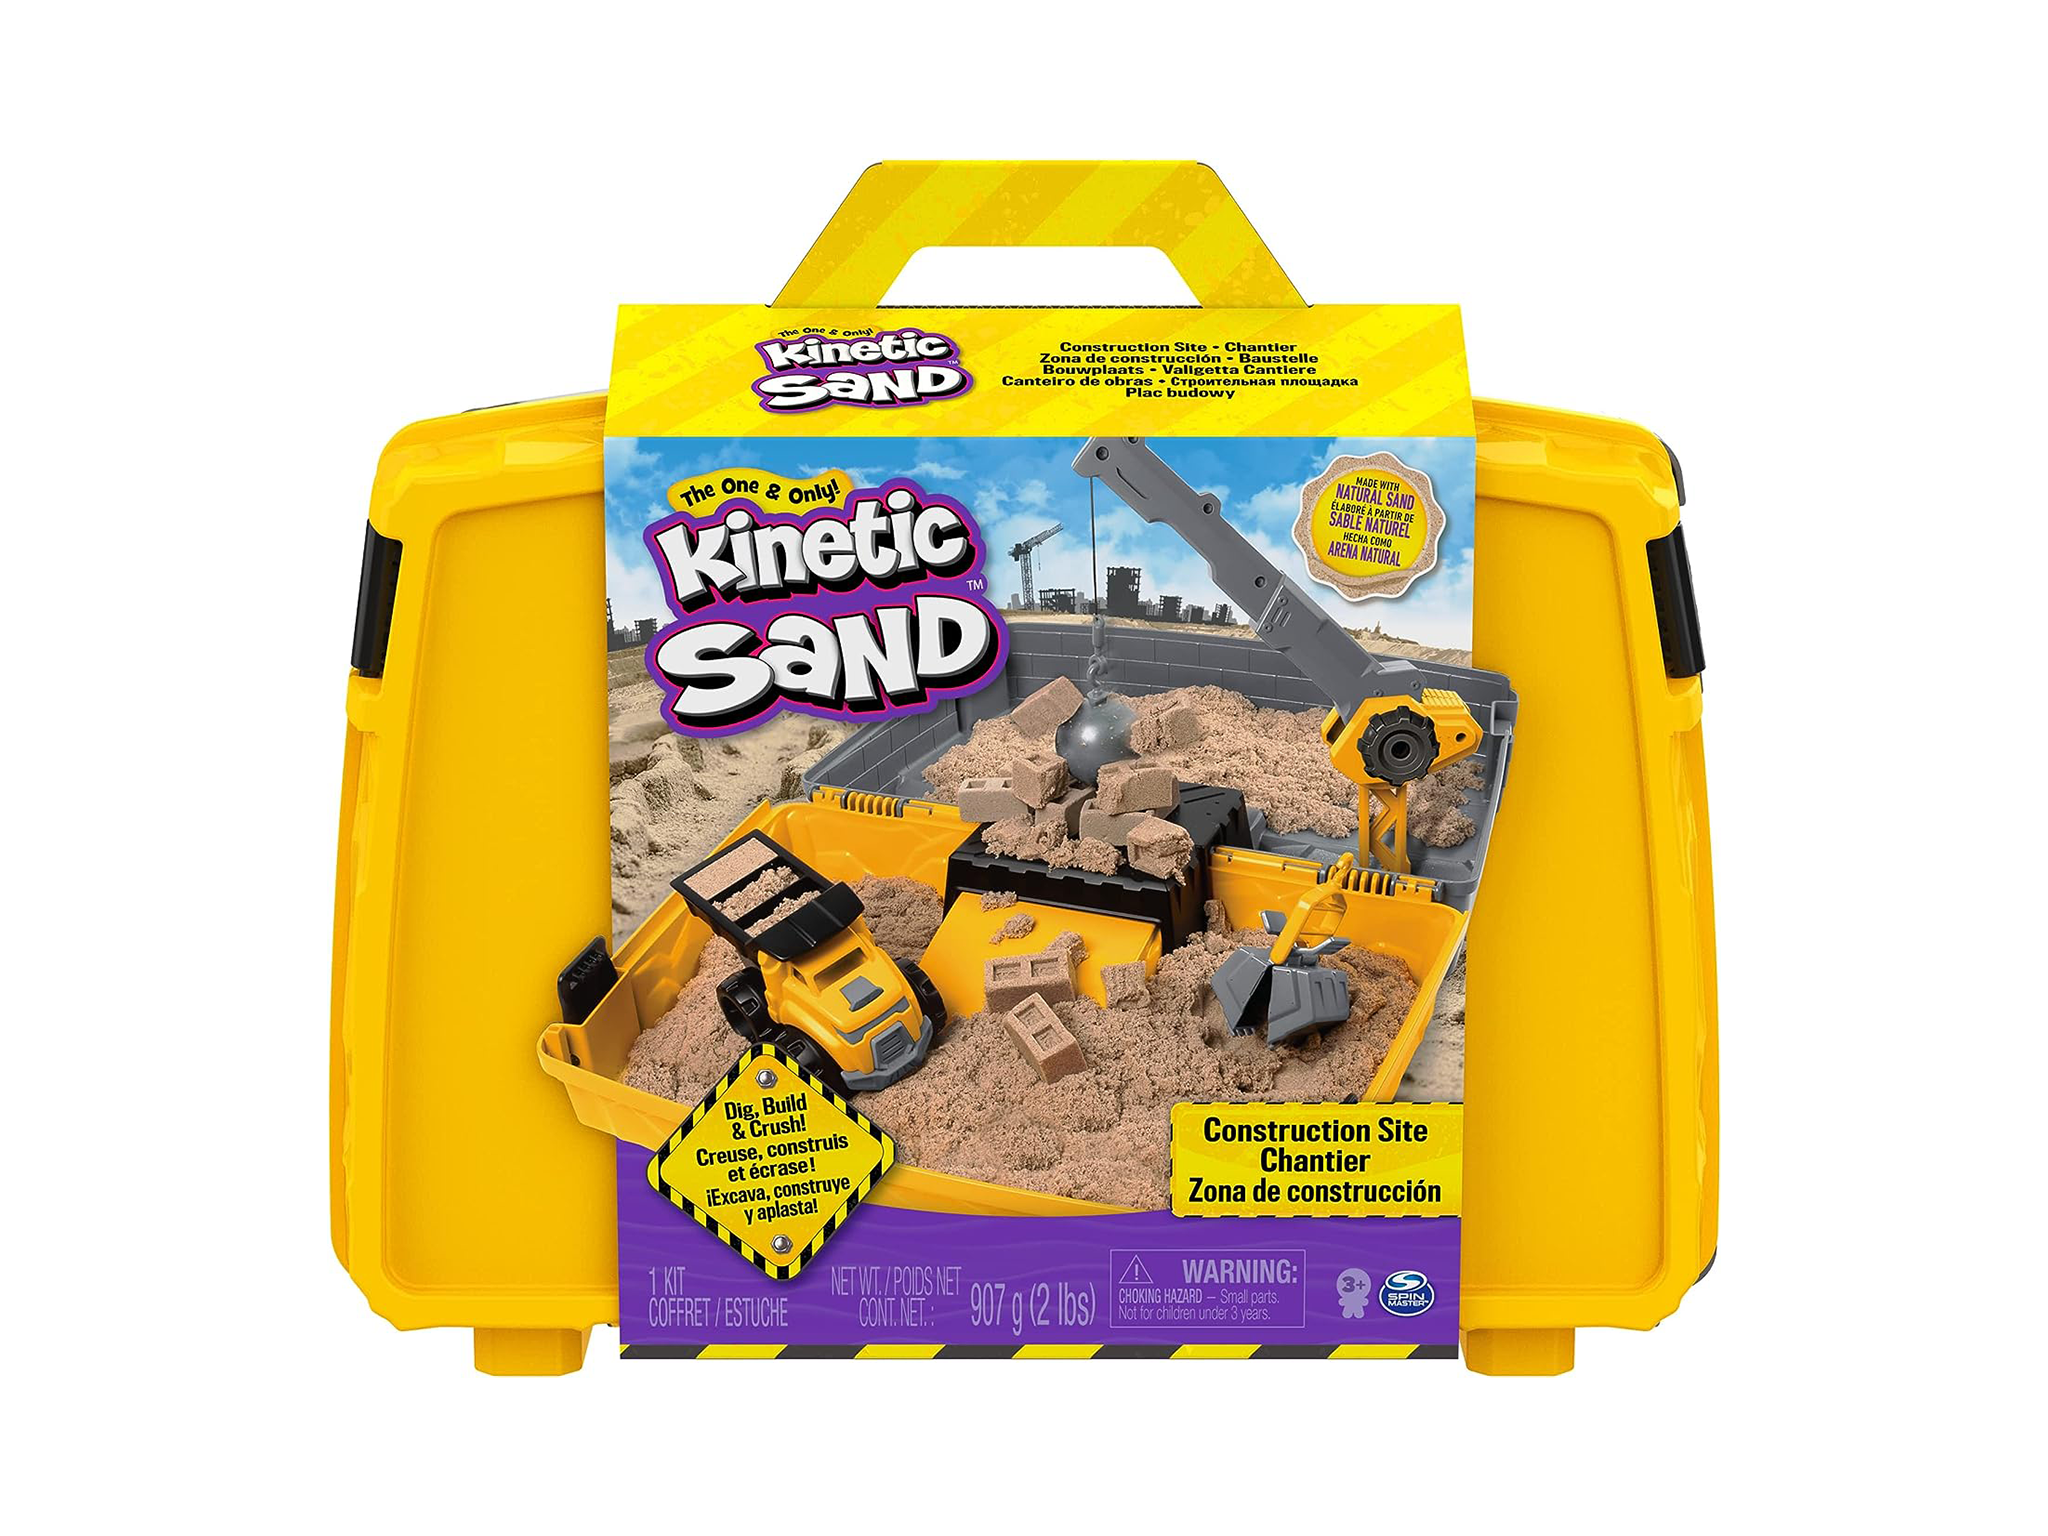 Kinetic Sand construction site